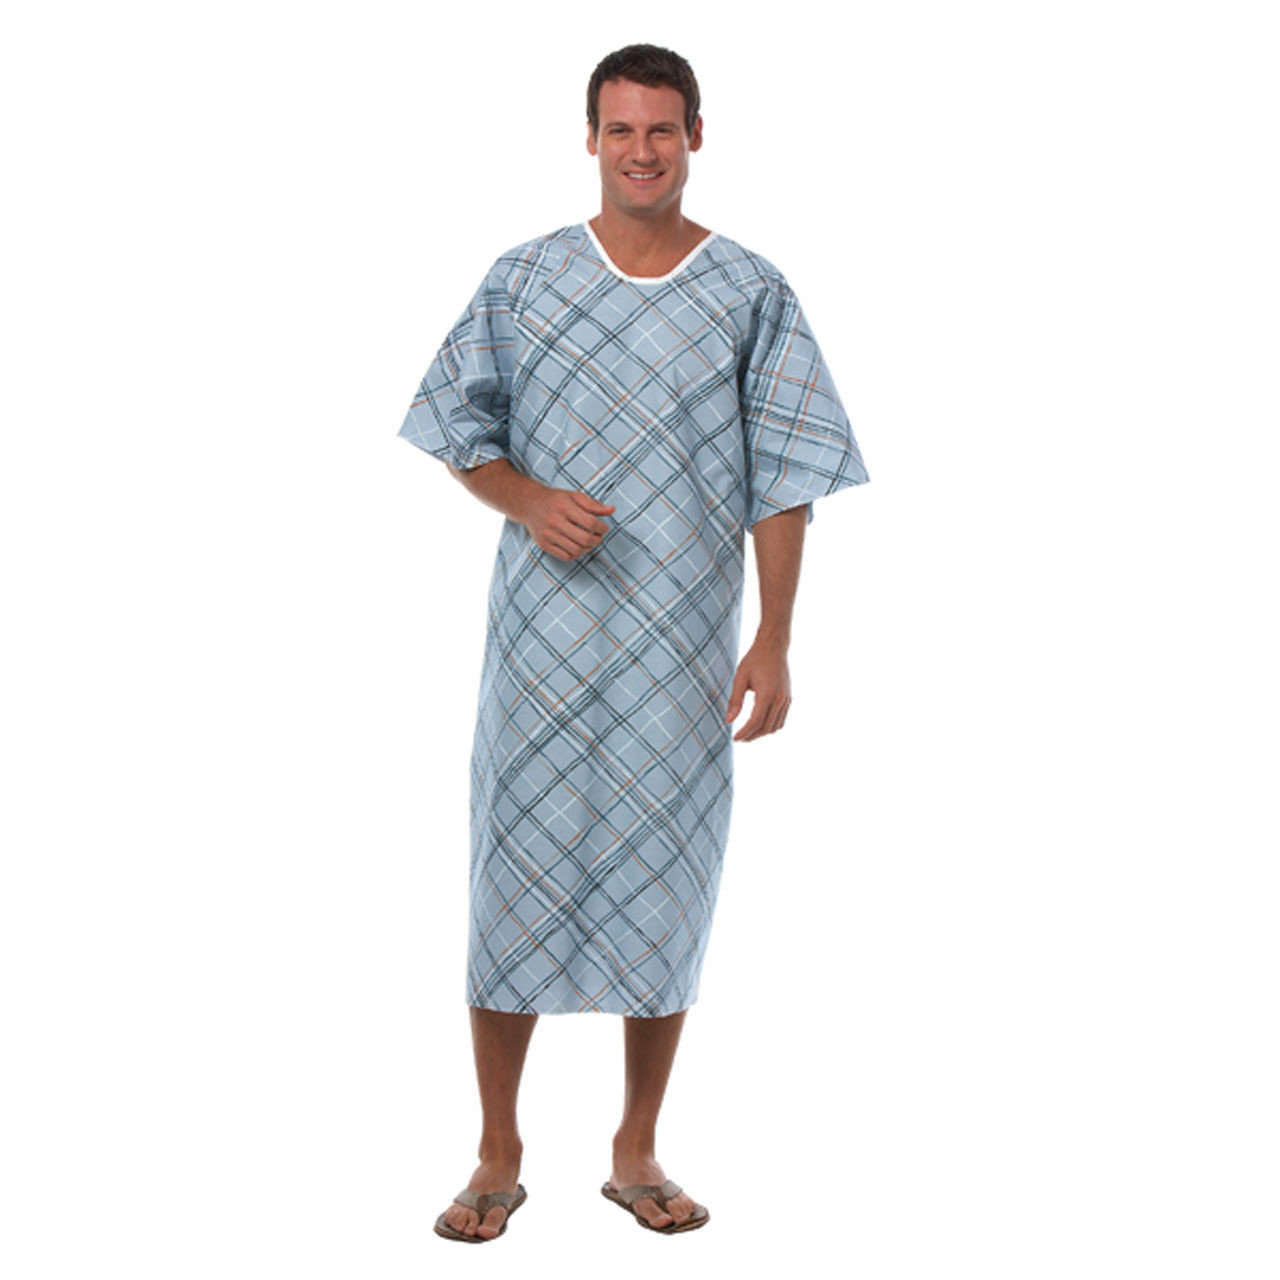 Buy Hospital Gown for Men and Women